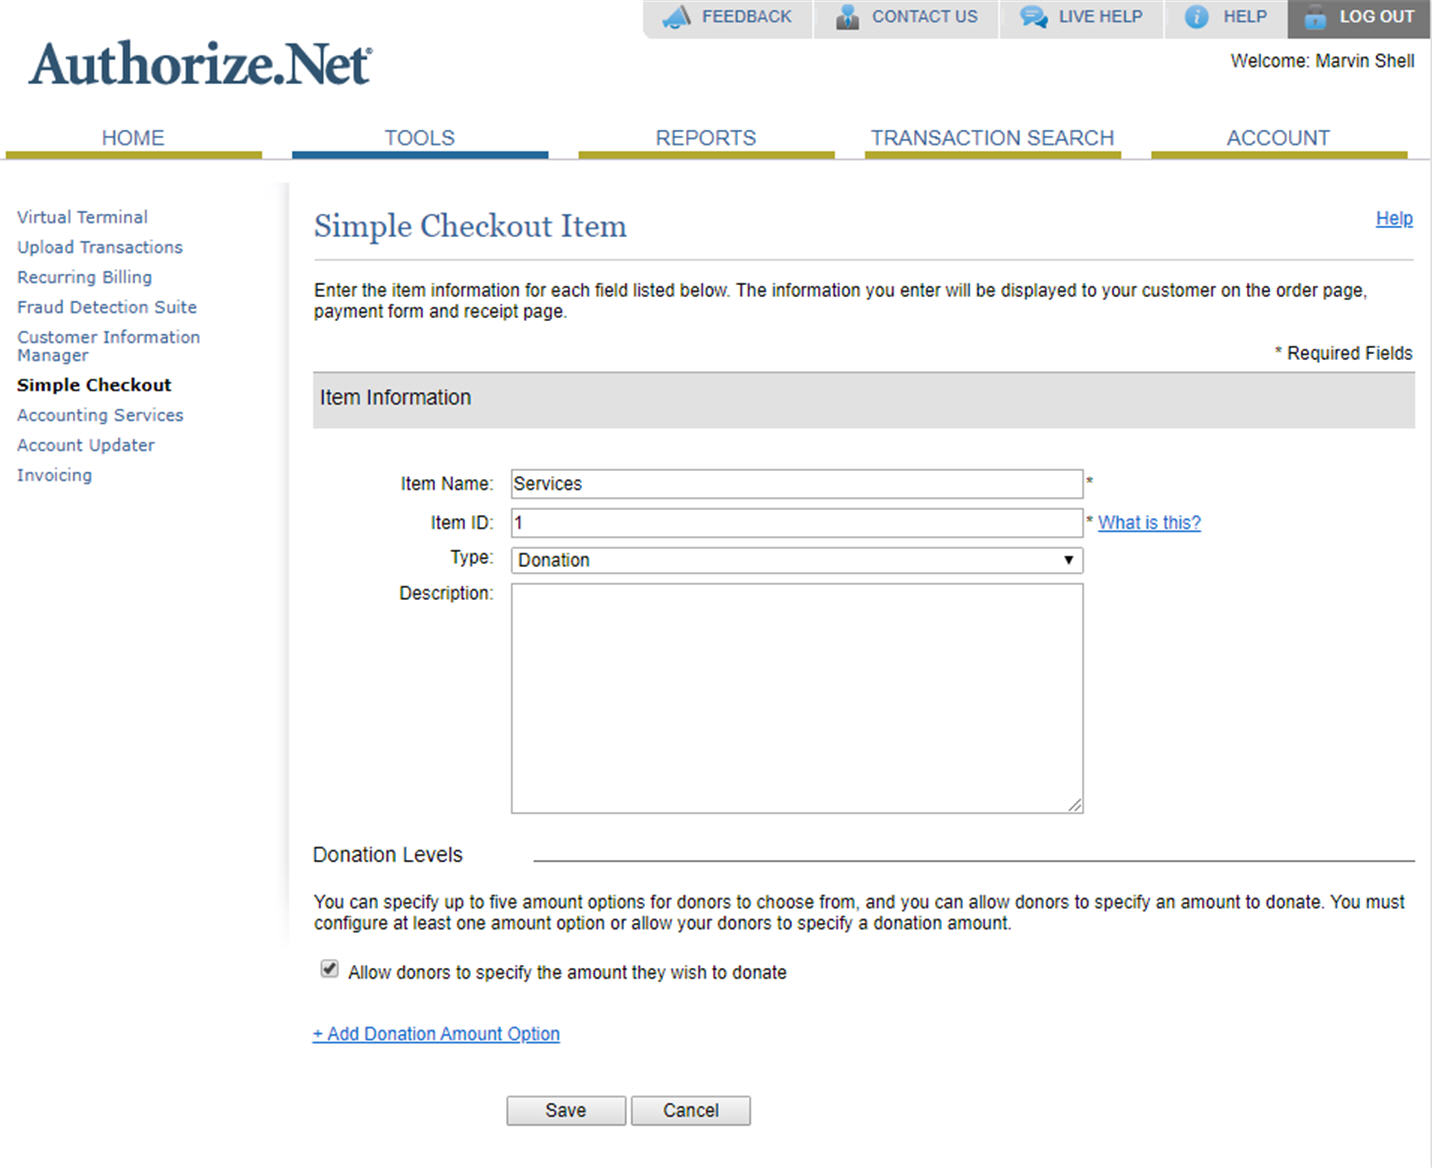 I cannot get my eCheck form to work with Authorize net